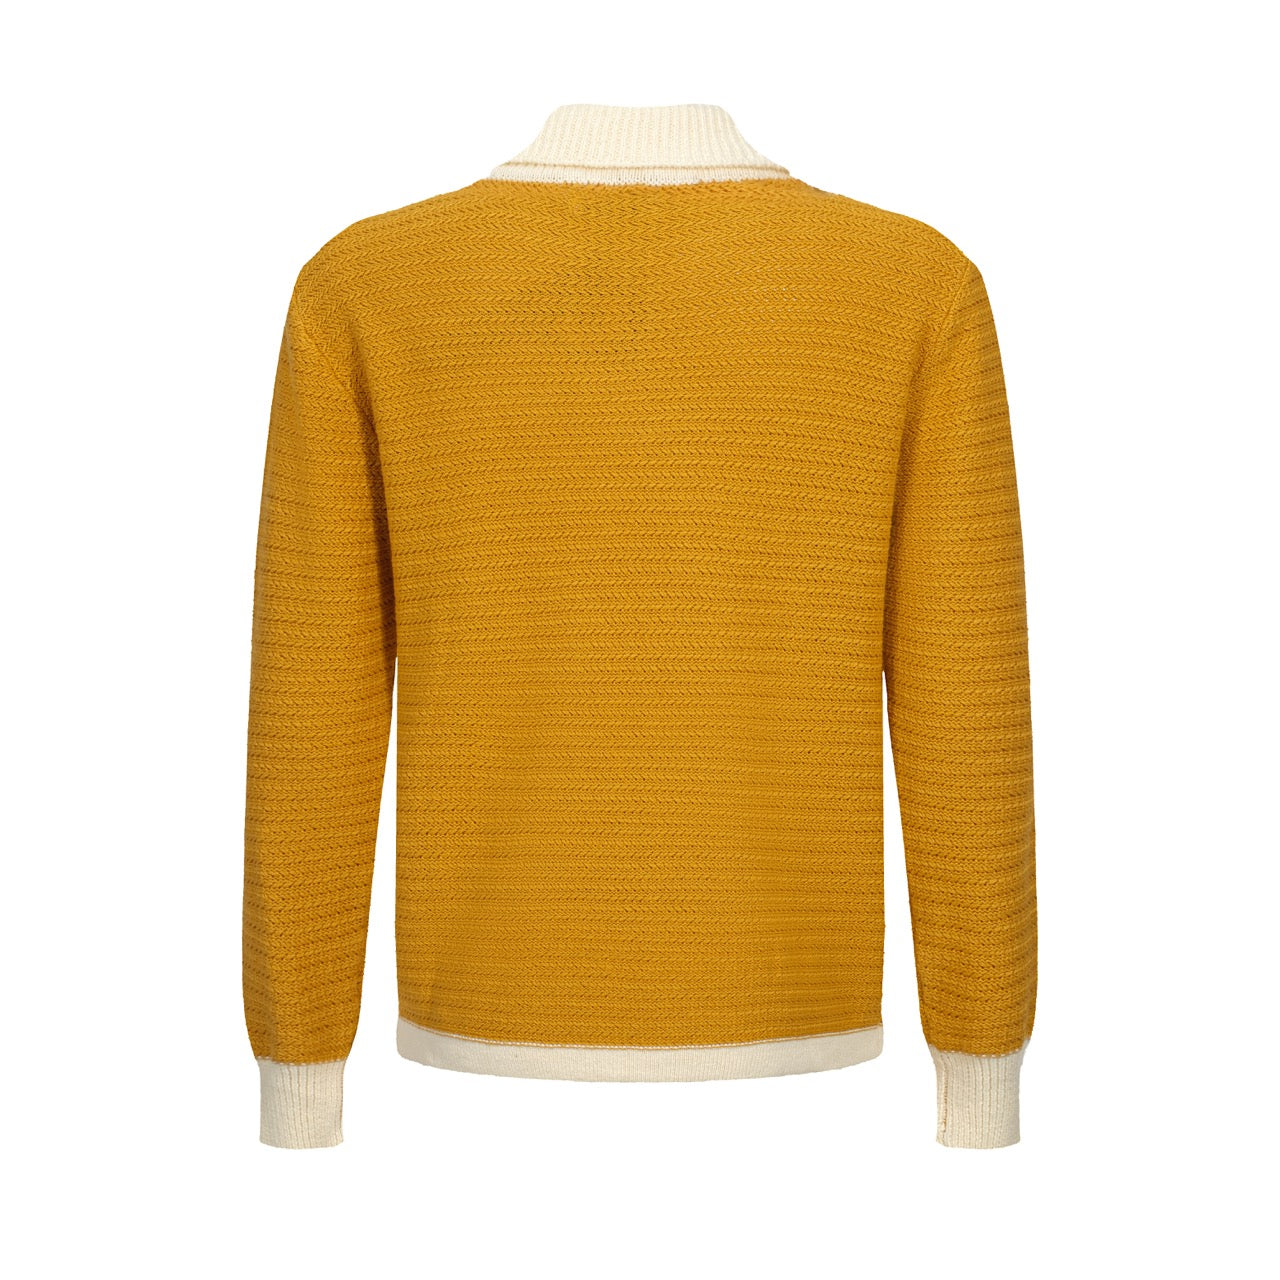 Men's Light Yellow Knitted Long Sleeves Polo